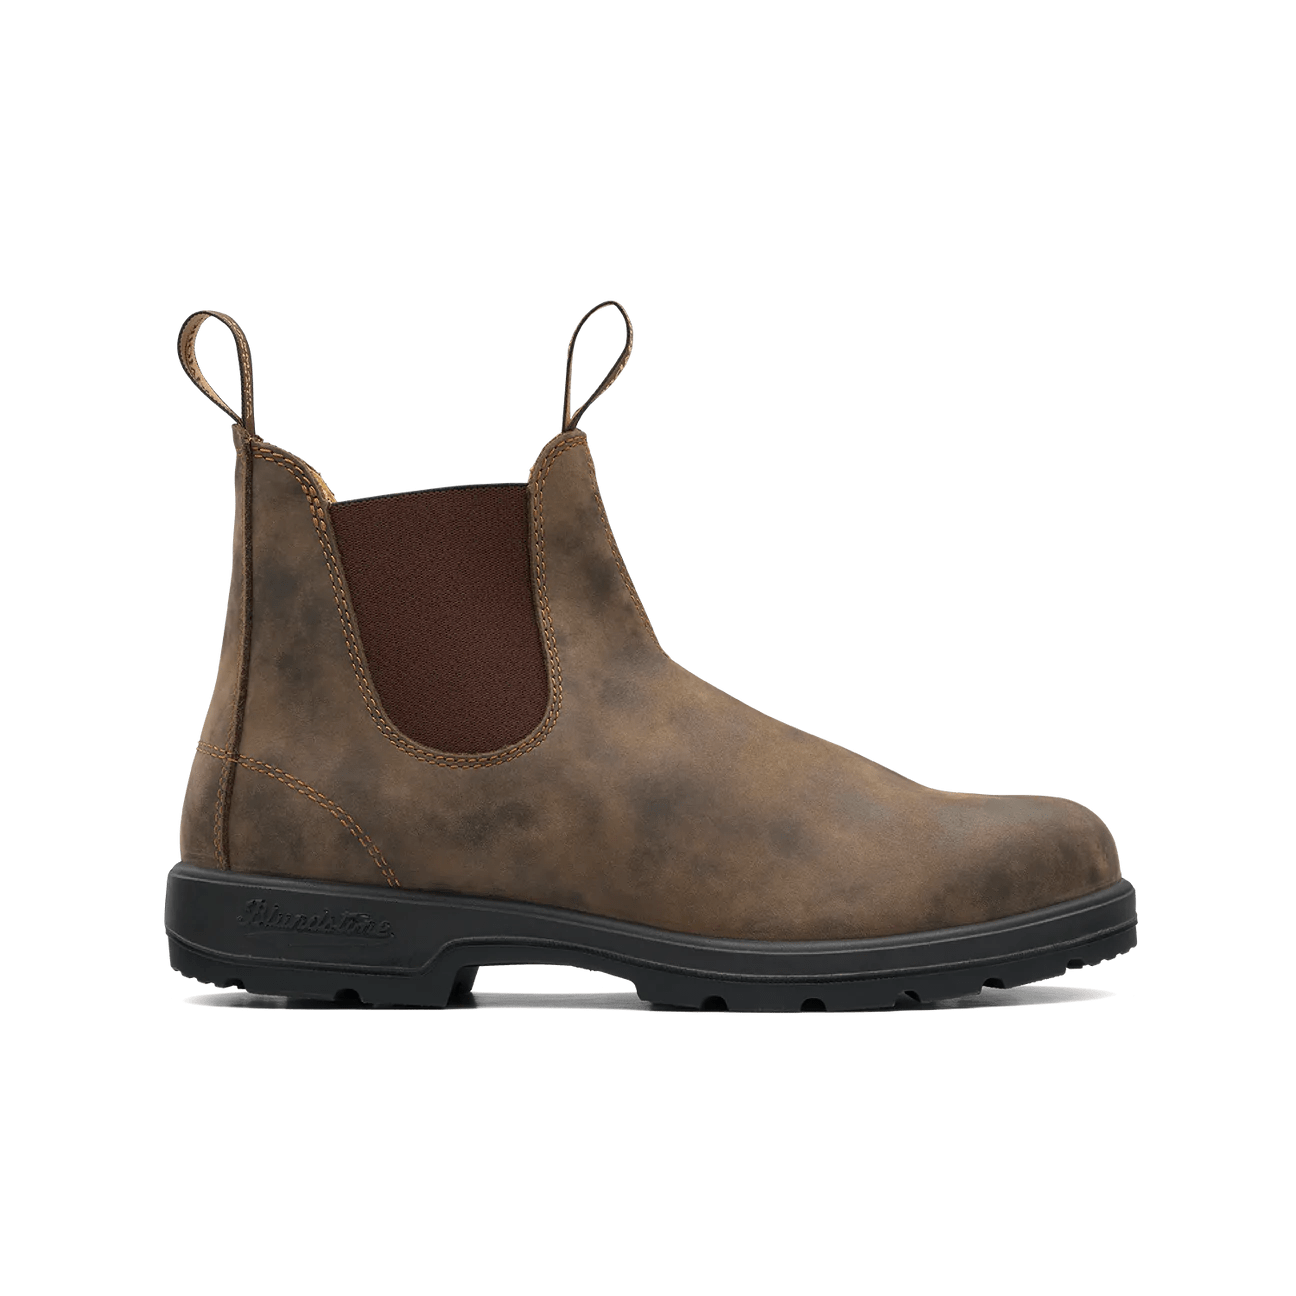 Blundstone Unisex Classic Boot 585 - Rustic Brown, Sole To Soul Footwear  Inc.